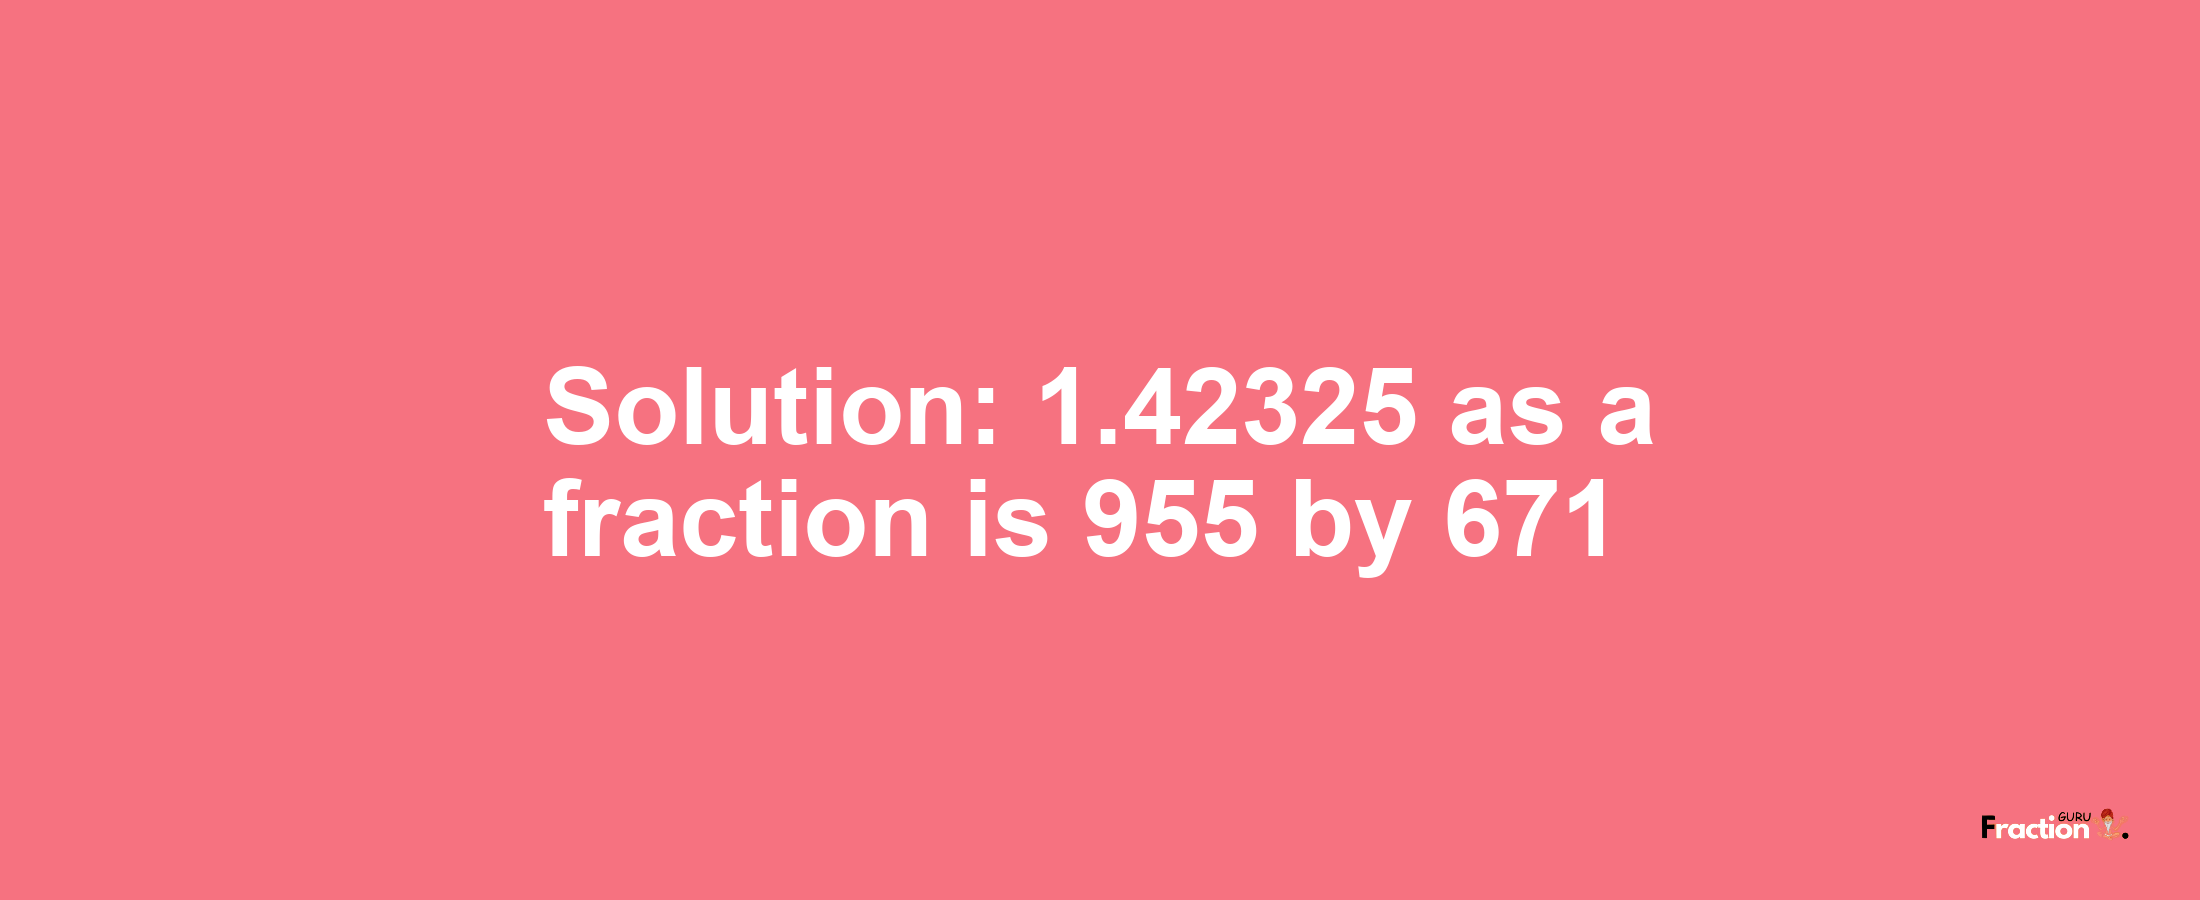 Solution:1.42325 as a fraction is 955/671